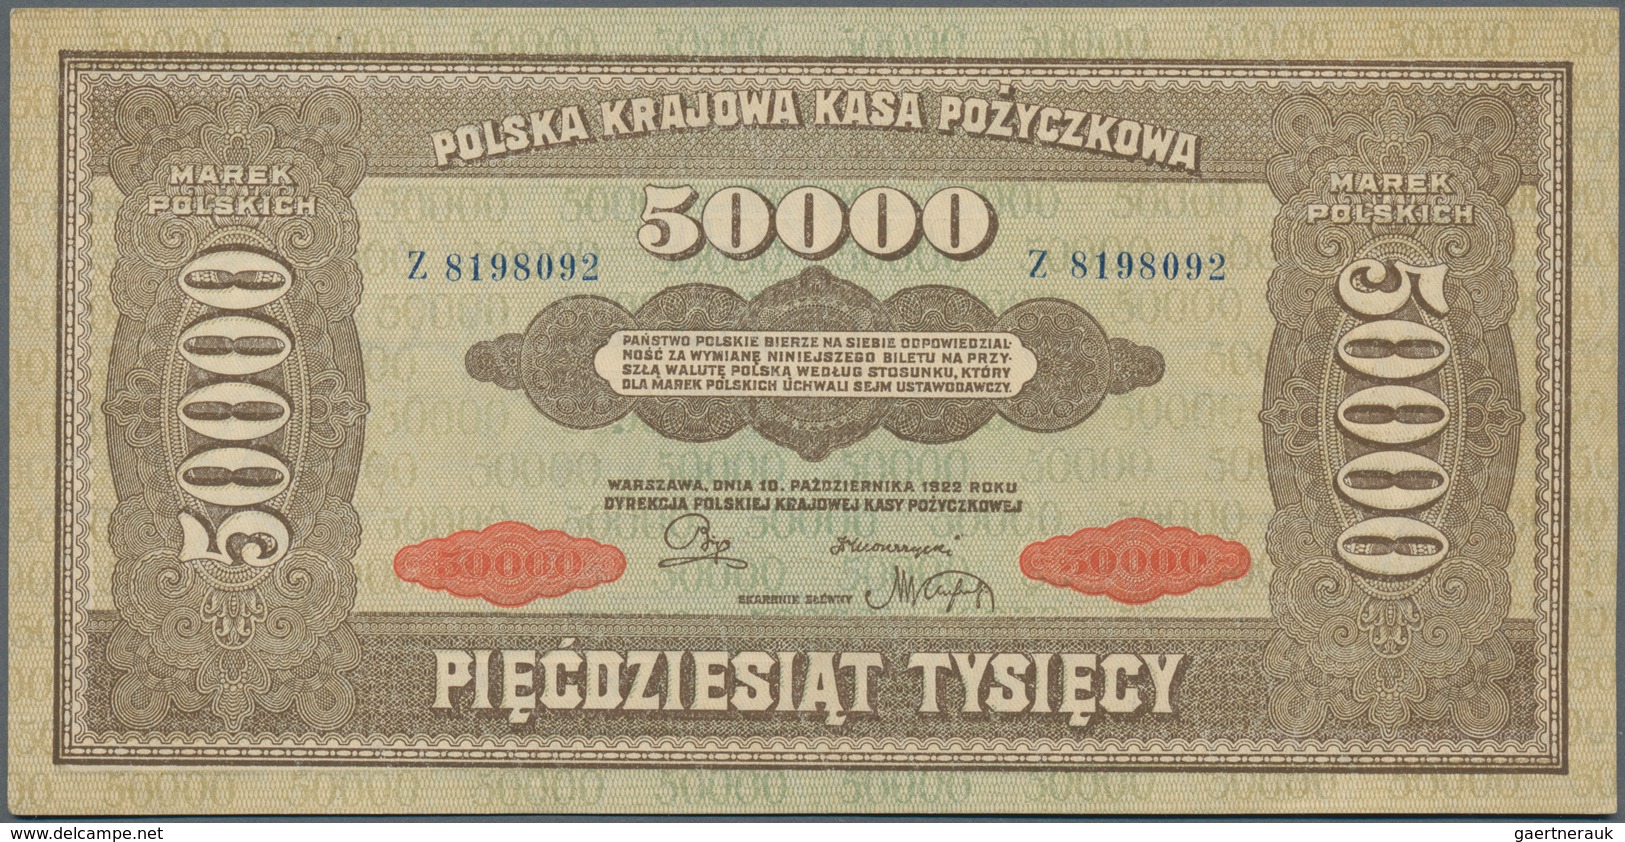 Poland / Polen: Set with 5 banknotes of the 1920’s issue comprising 10.000 Marek 1922 (XF), 50.000 M